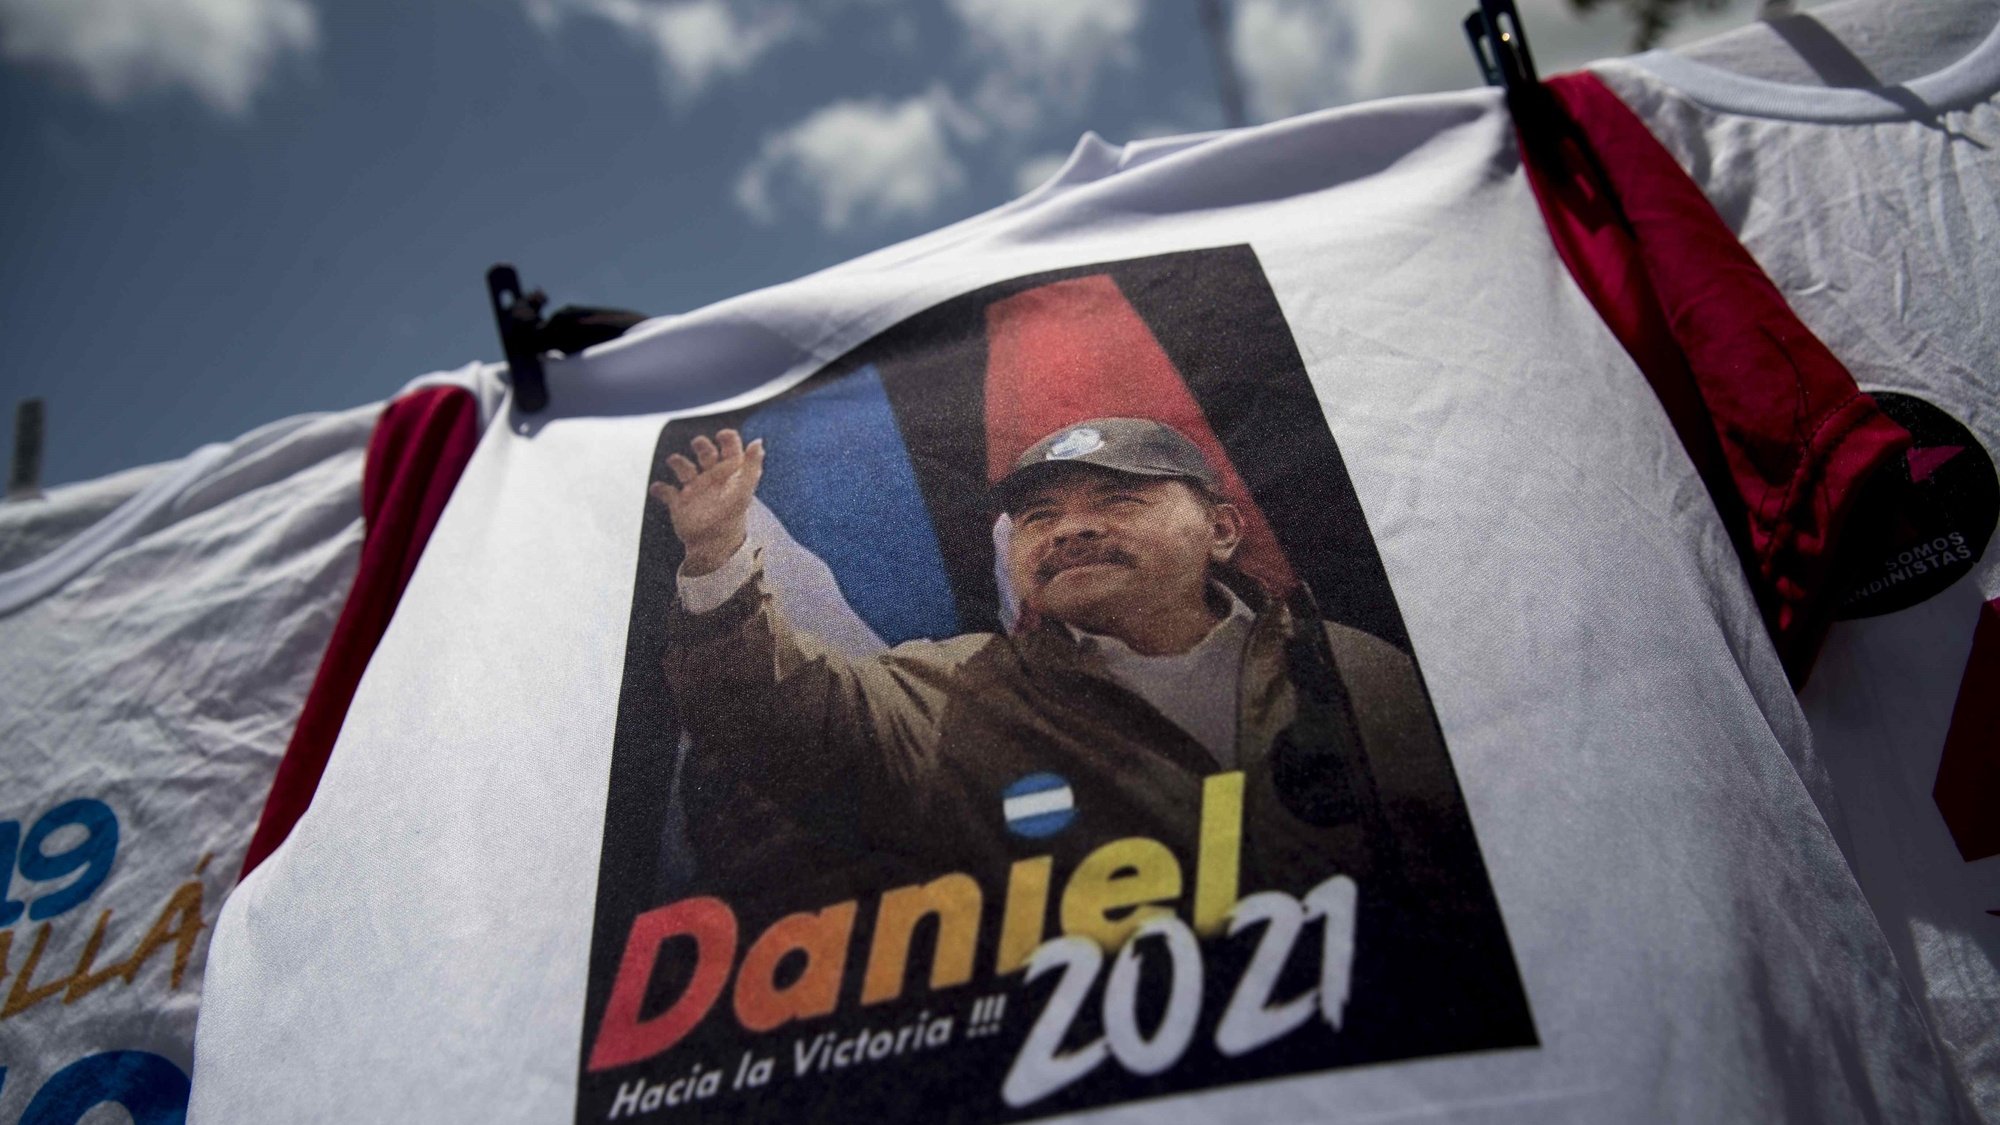 epa08554162 View of a t-shirt depicting Nicaraguan President Daniel Ortega in honor of the Nicaraguan revolution in Managua, Nicaragua, 18 July 2020. For the first time since 1979, the old center of Managua will not serve as the stage for the largest annual party of the Sandinistas, the Nicaraguan popular revolution, celebrated annually on 19 July, due to the coronavirus pandemic.  EPA/Jorge Torres